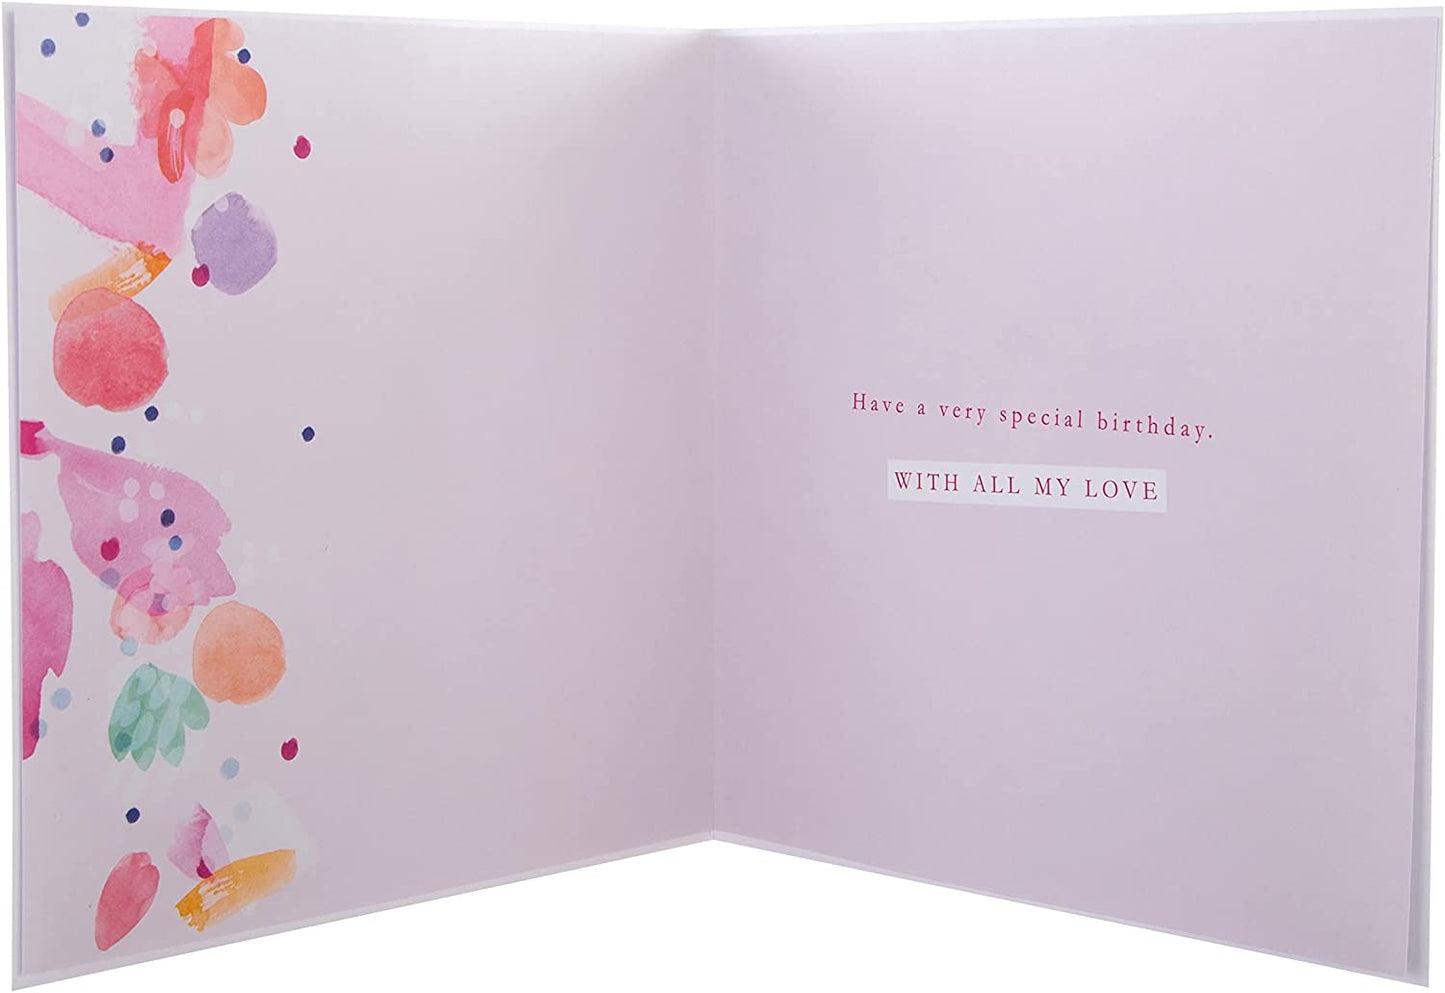 Classic Love Heart Design for the One You Love Large Birthday Card